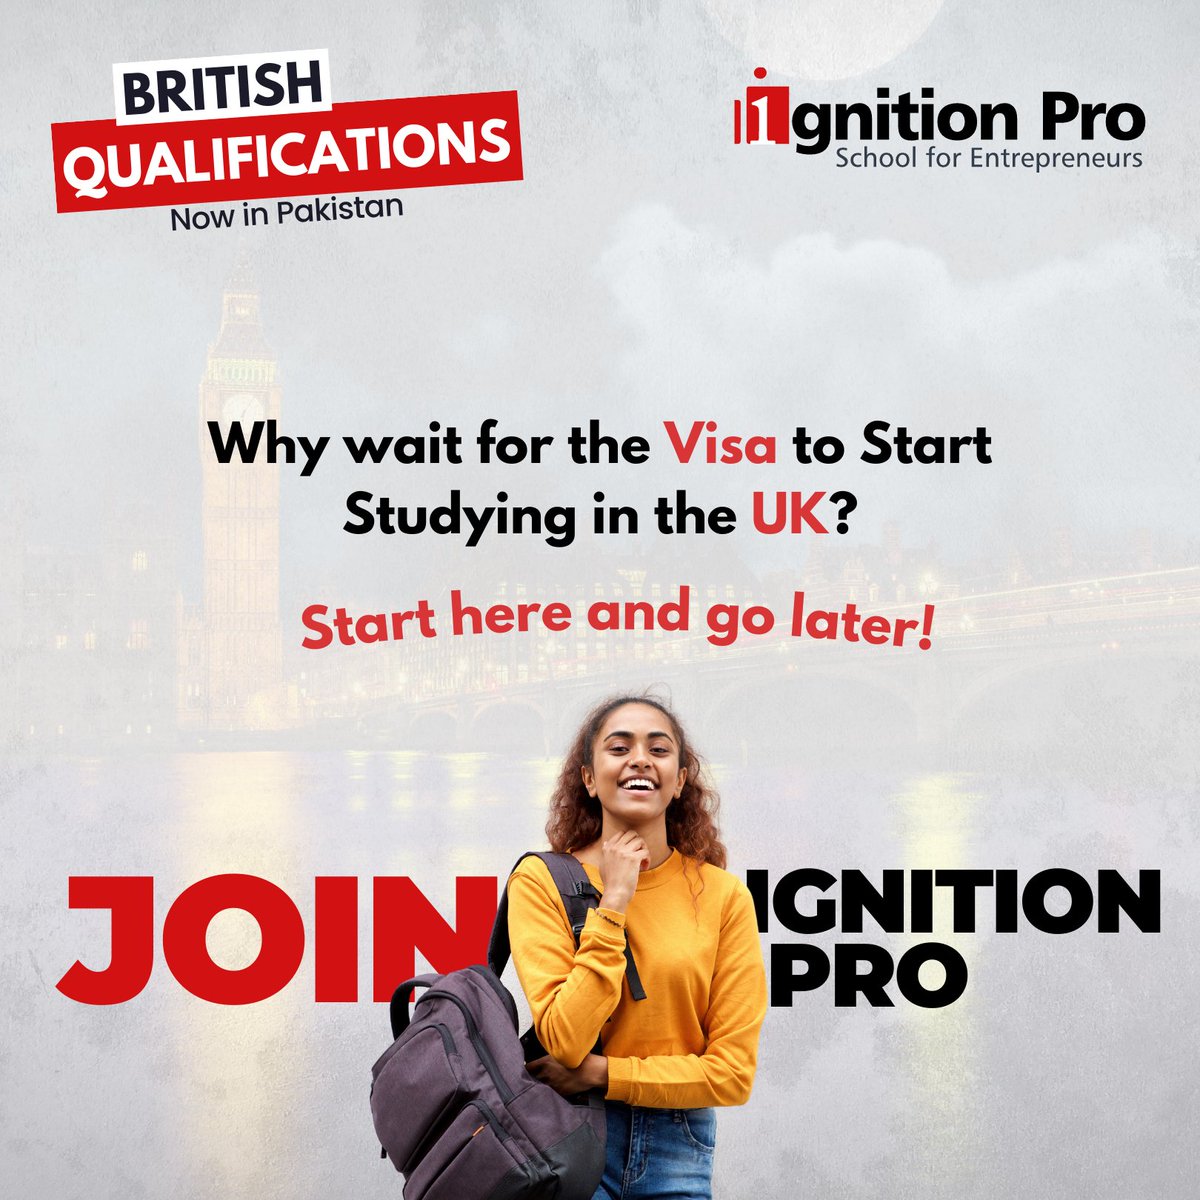 We have come to Pakistan for you. Unlock the door to an international degree with Ignition Pro. Start your #education with a UK qualification today! 

#UKQualifications #Pakistan #InternationalDegree #college #ignitionpro #Lahore #Trending